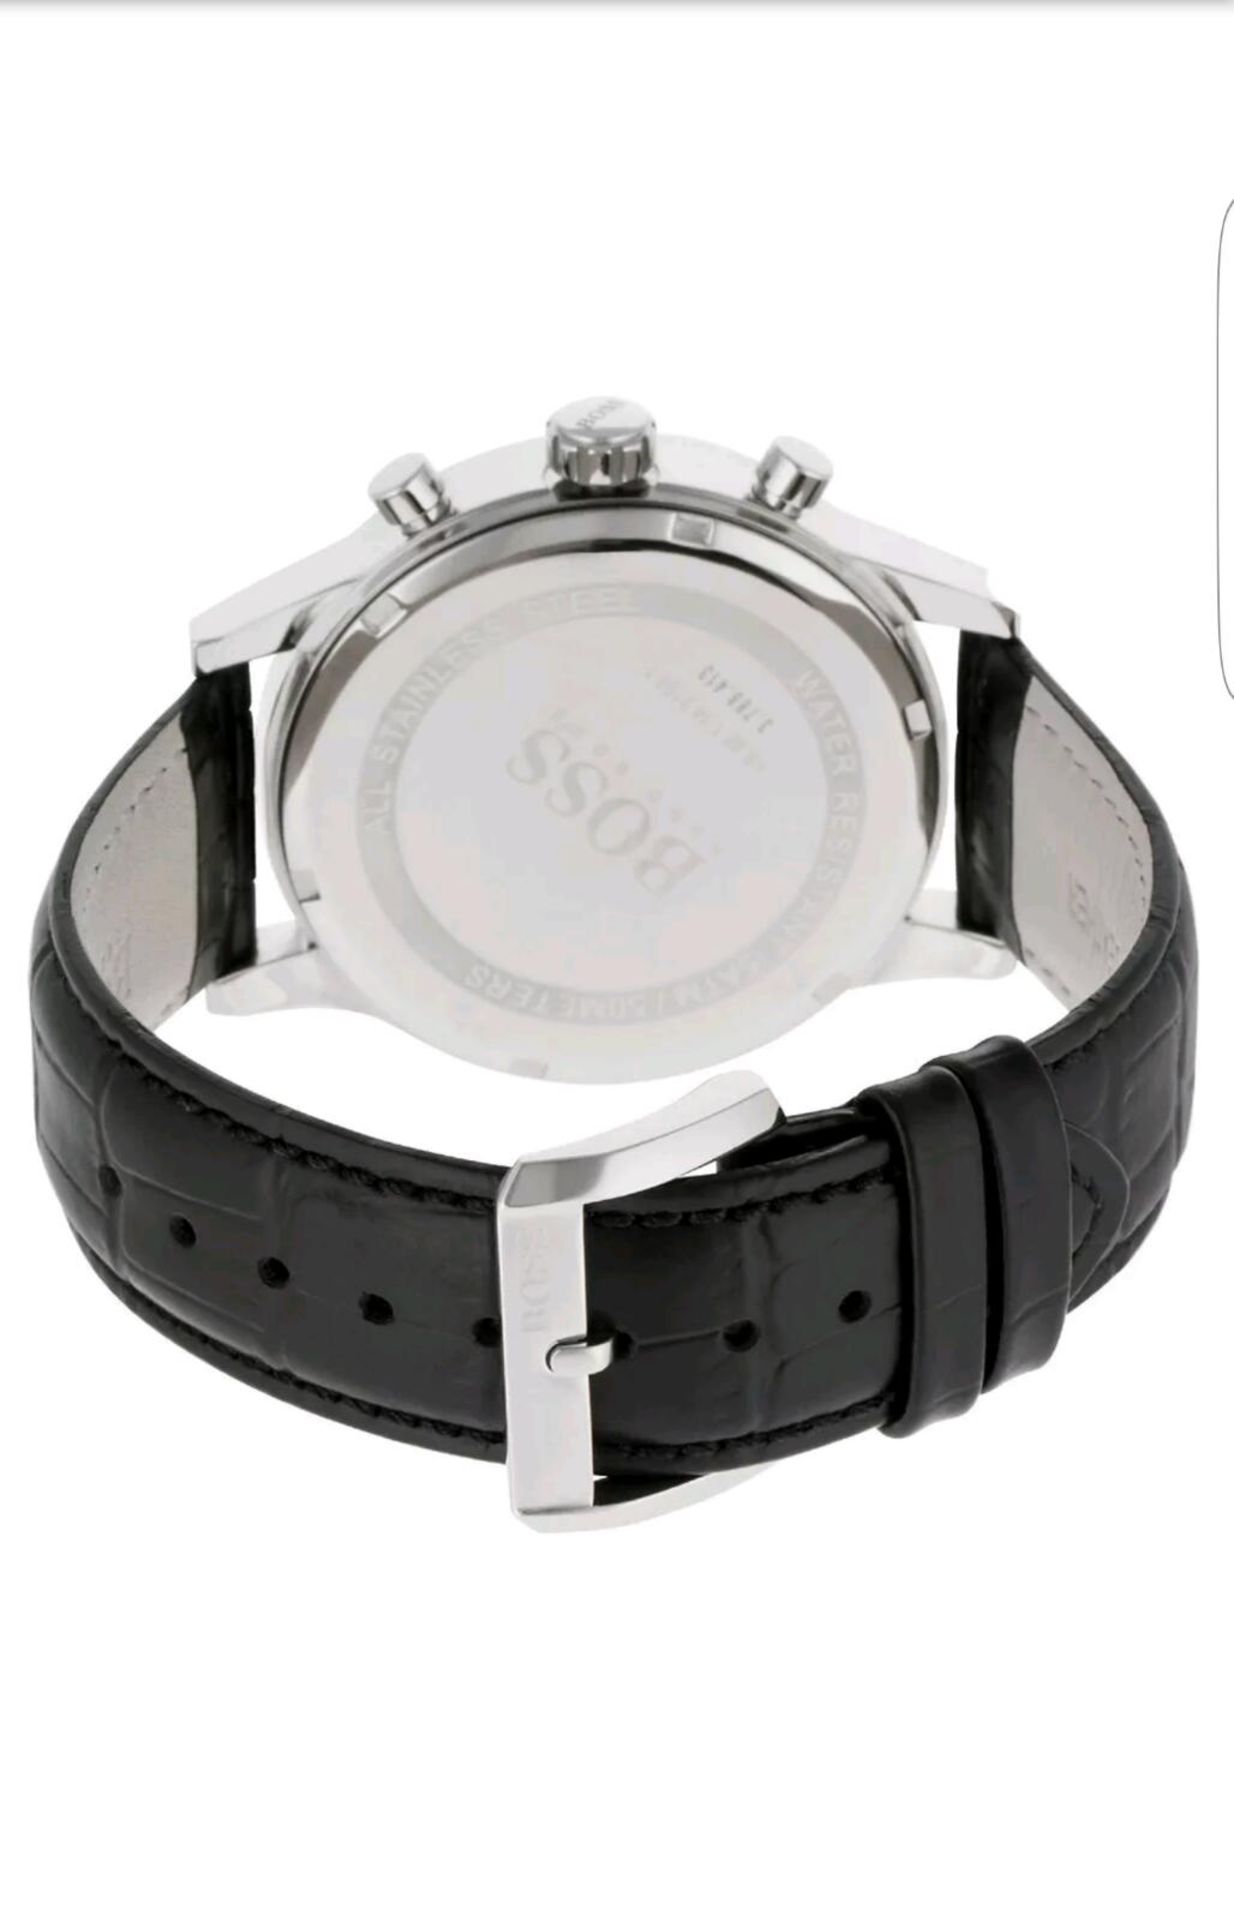 BRAND NEW GENTS HUGO BOSS WATCH 1512448, COMPLETE WITH ORIGINAL BOX AND MANUAL - Image 2 of 2